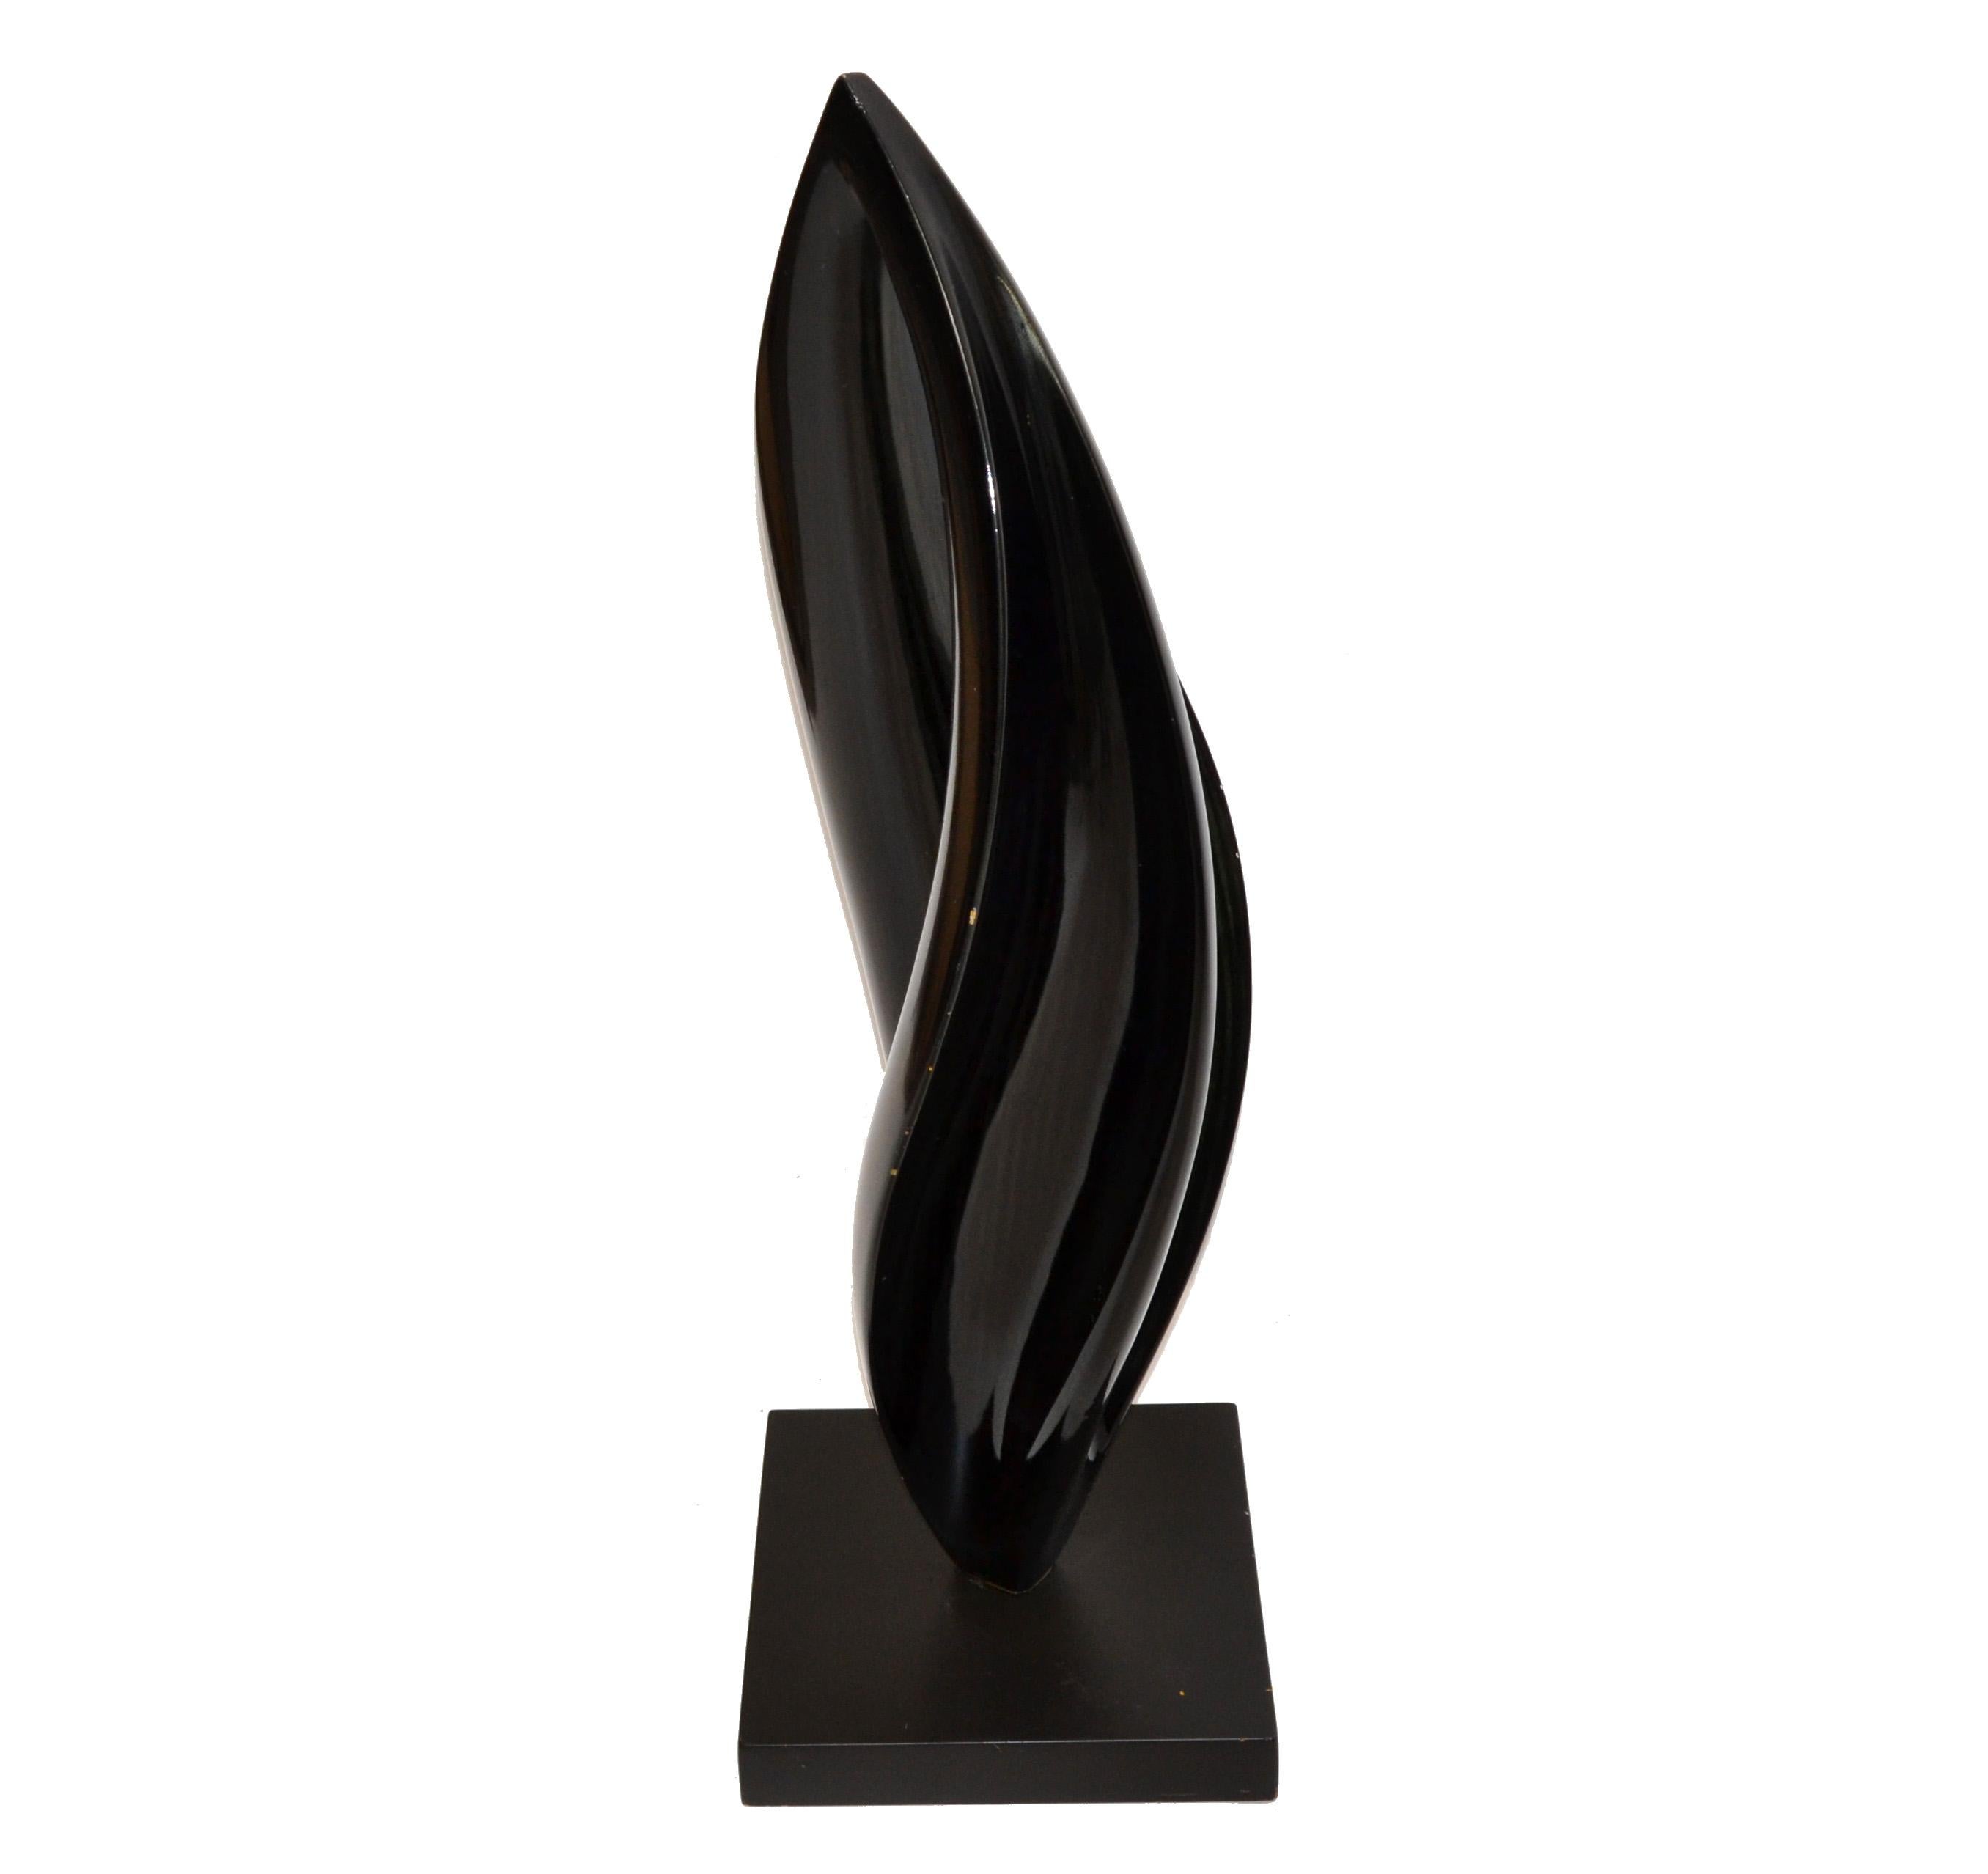 Large Mid-Century Modern organic shaped wood sculpture in lacquered black finish.
The fine art sculpture is made out of one piece of wood.
Mounted on a square base and looks stunning in his floating design.